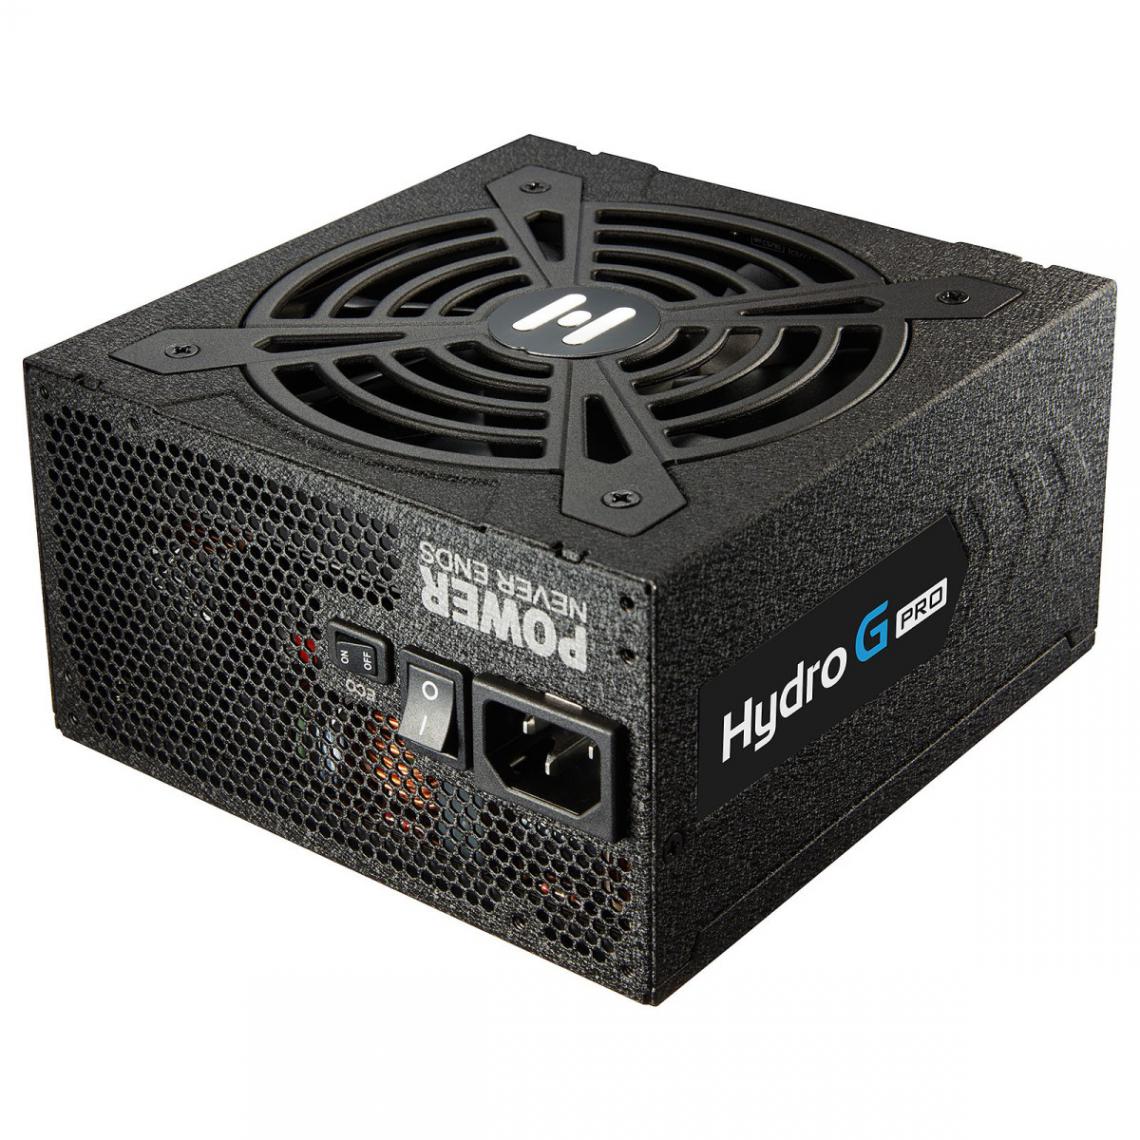 Fsp - HYDRO G PRO 850 - 80+ Gold - Alimentation modulaire